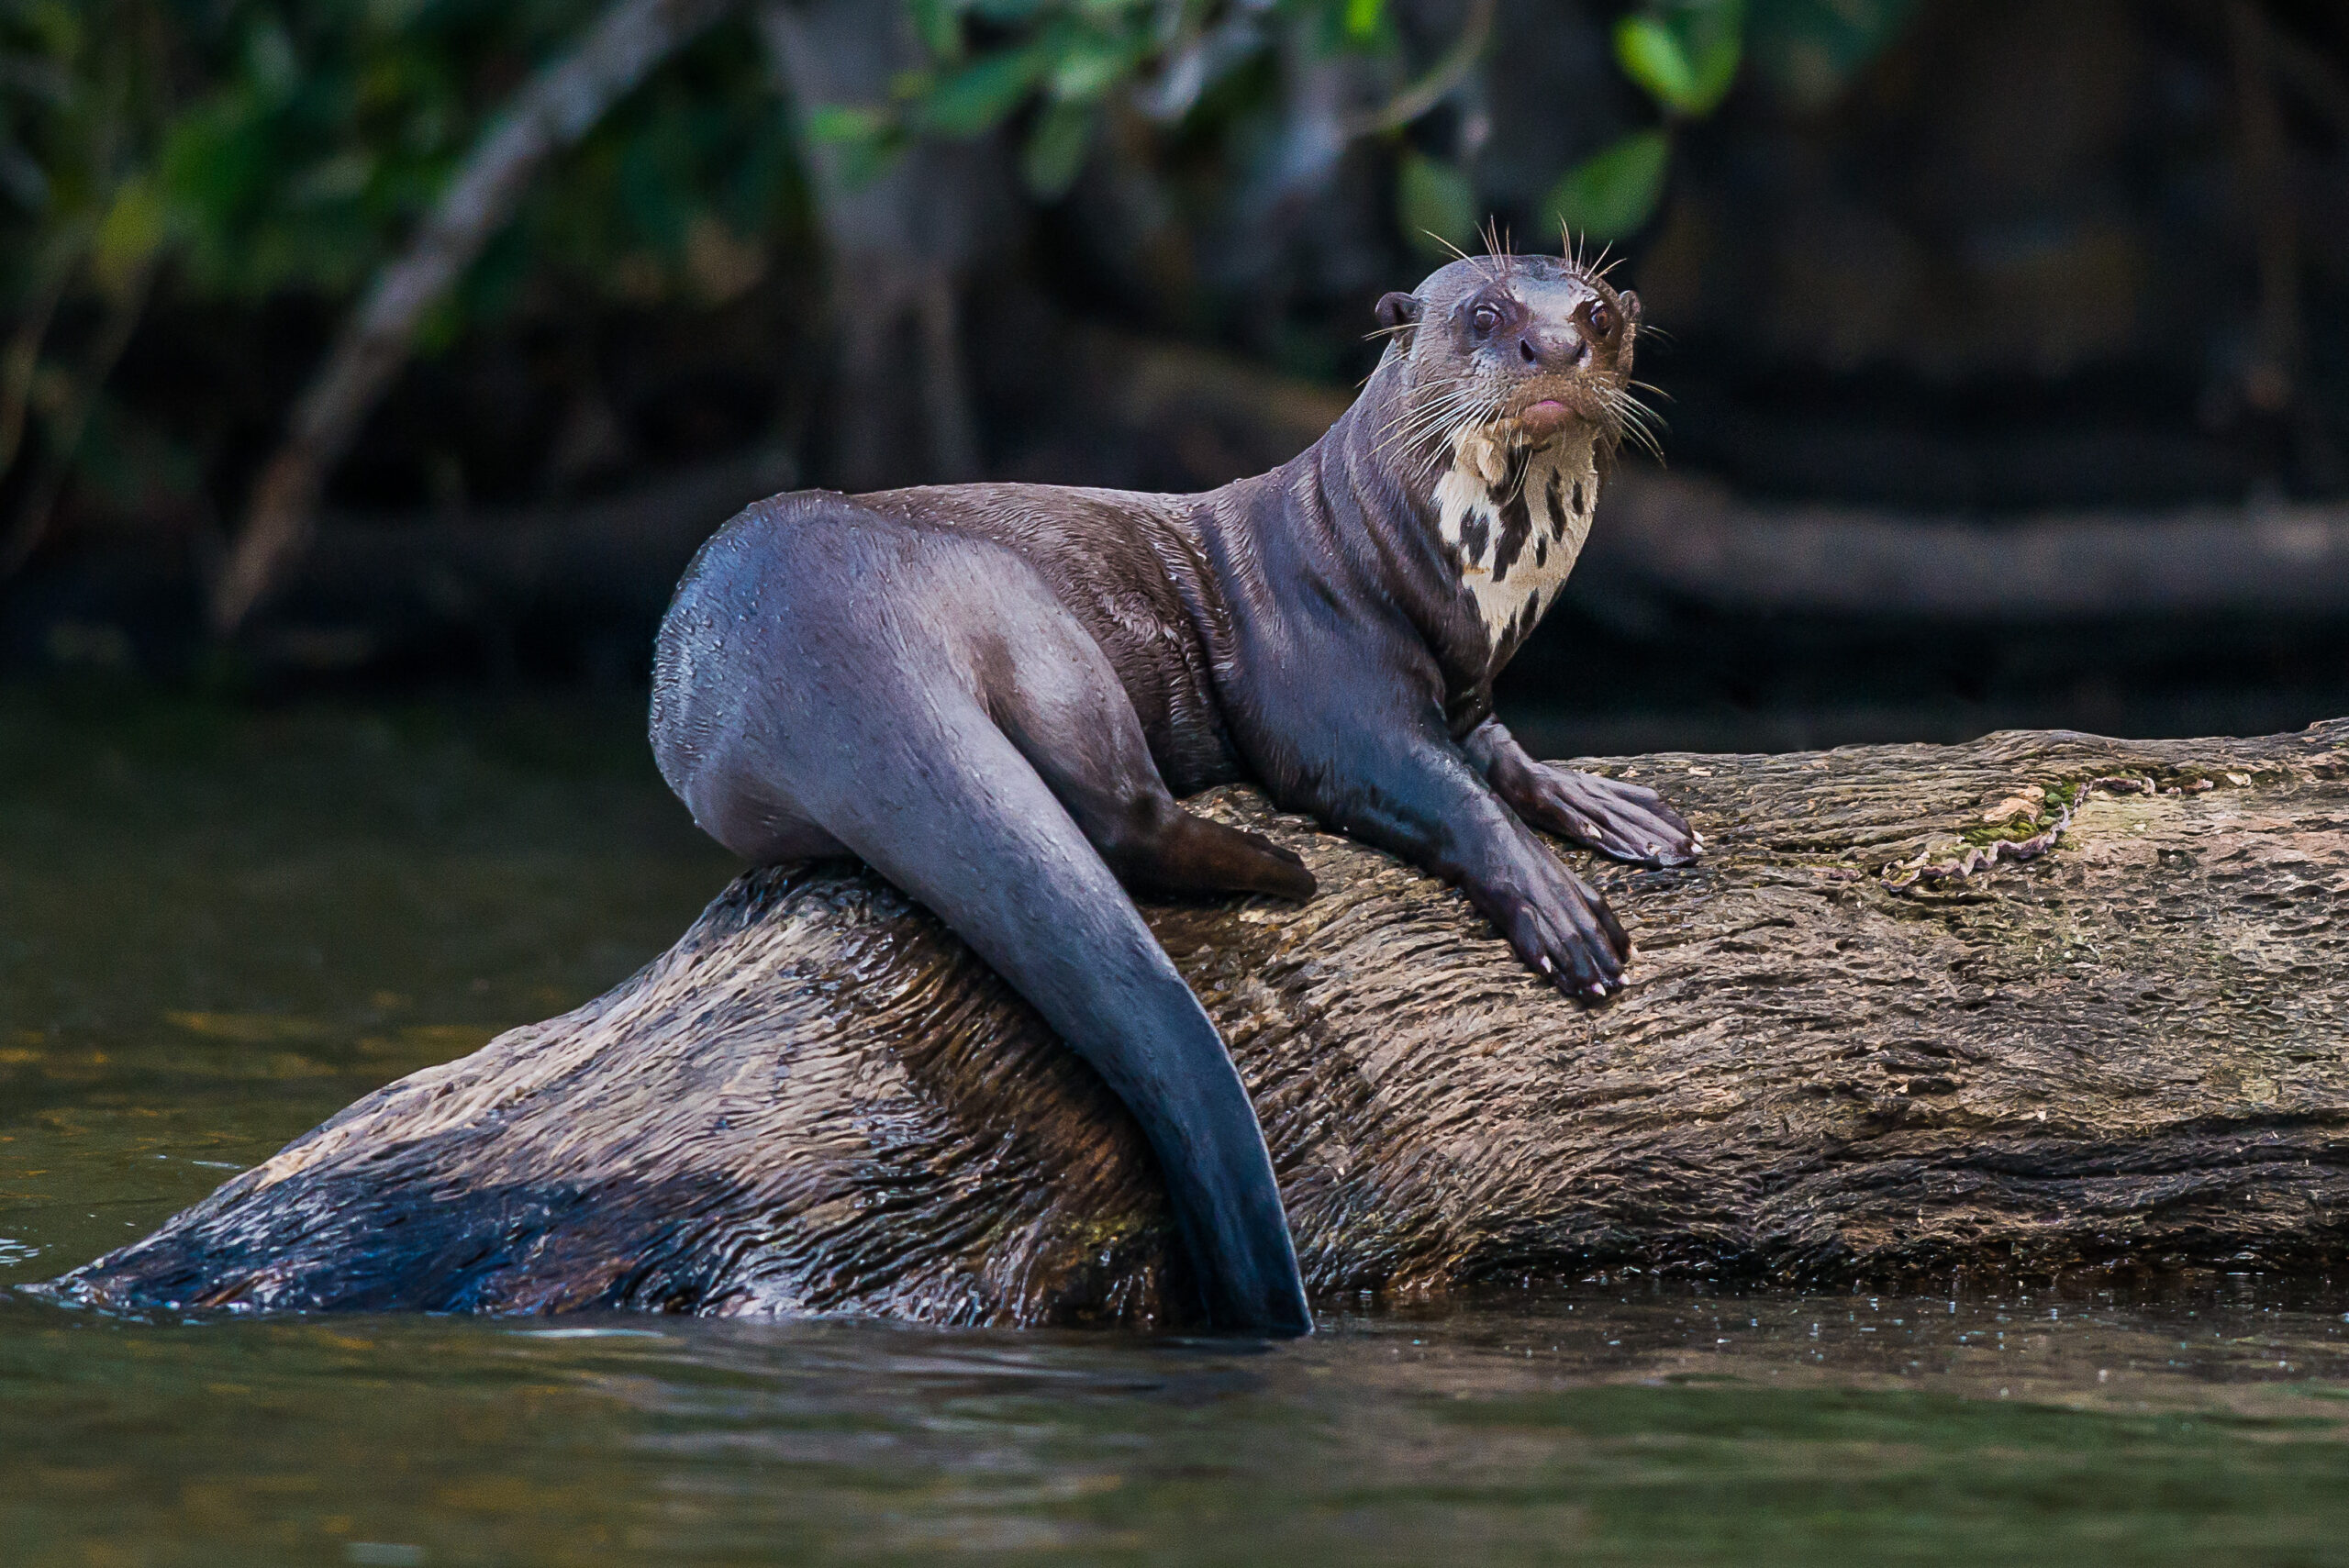 Giant River Otter in a river